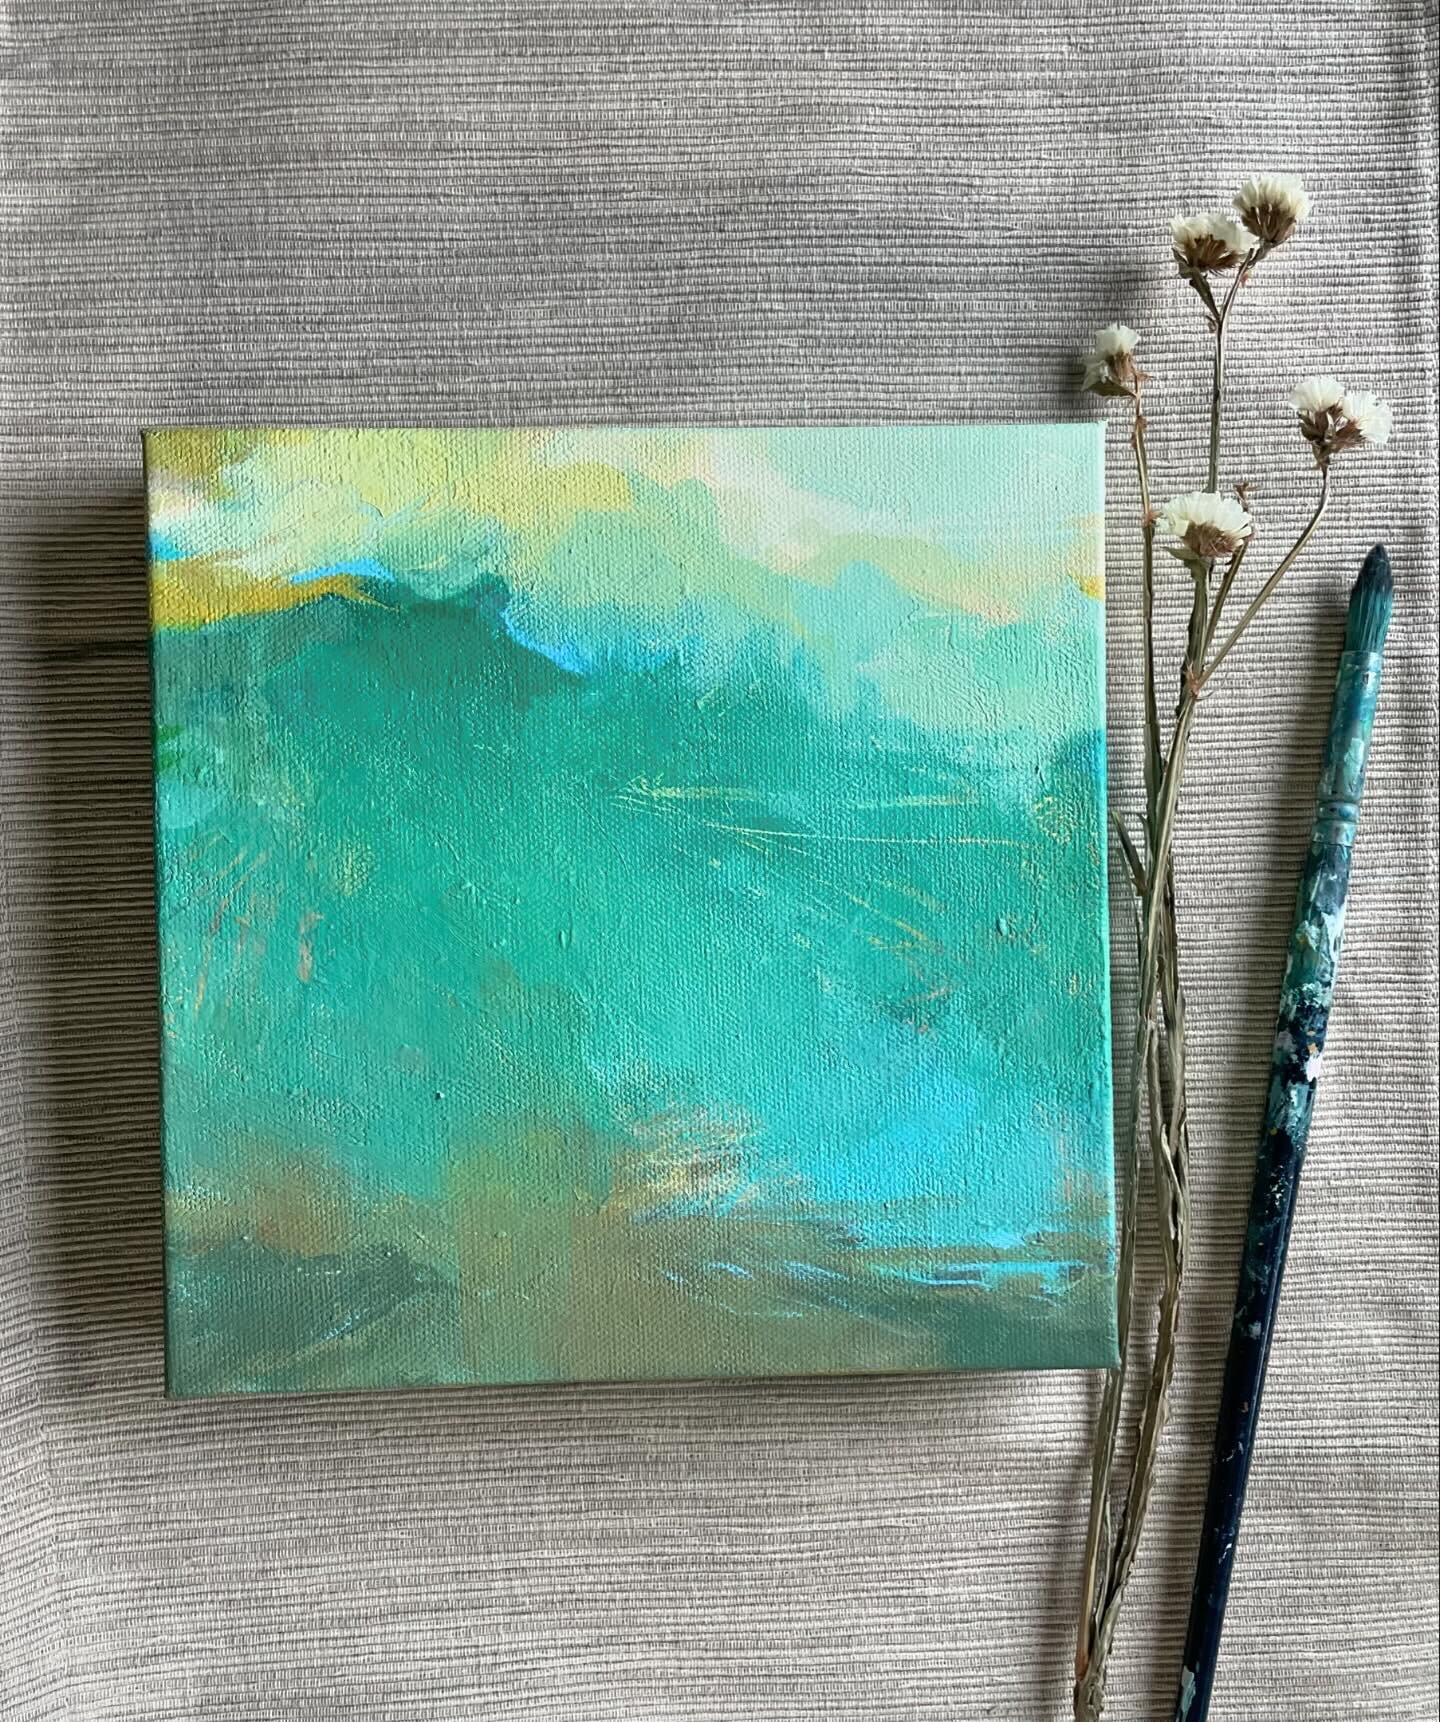 A closer look at one of the paintings in the latest collection.

My goal for this painting was to create a sense of spaciousness and calm, and I love how it turned out. Gotta love those subtle details and color shifts!

A Deep Inhale, 8x8&rdquo;, acr